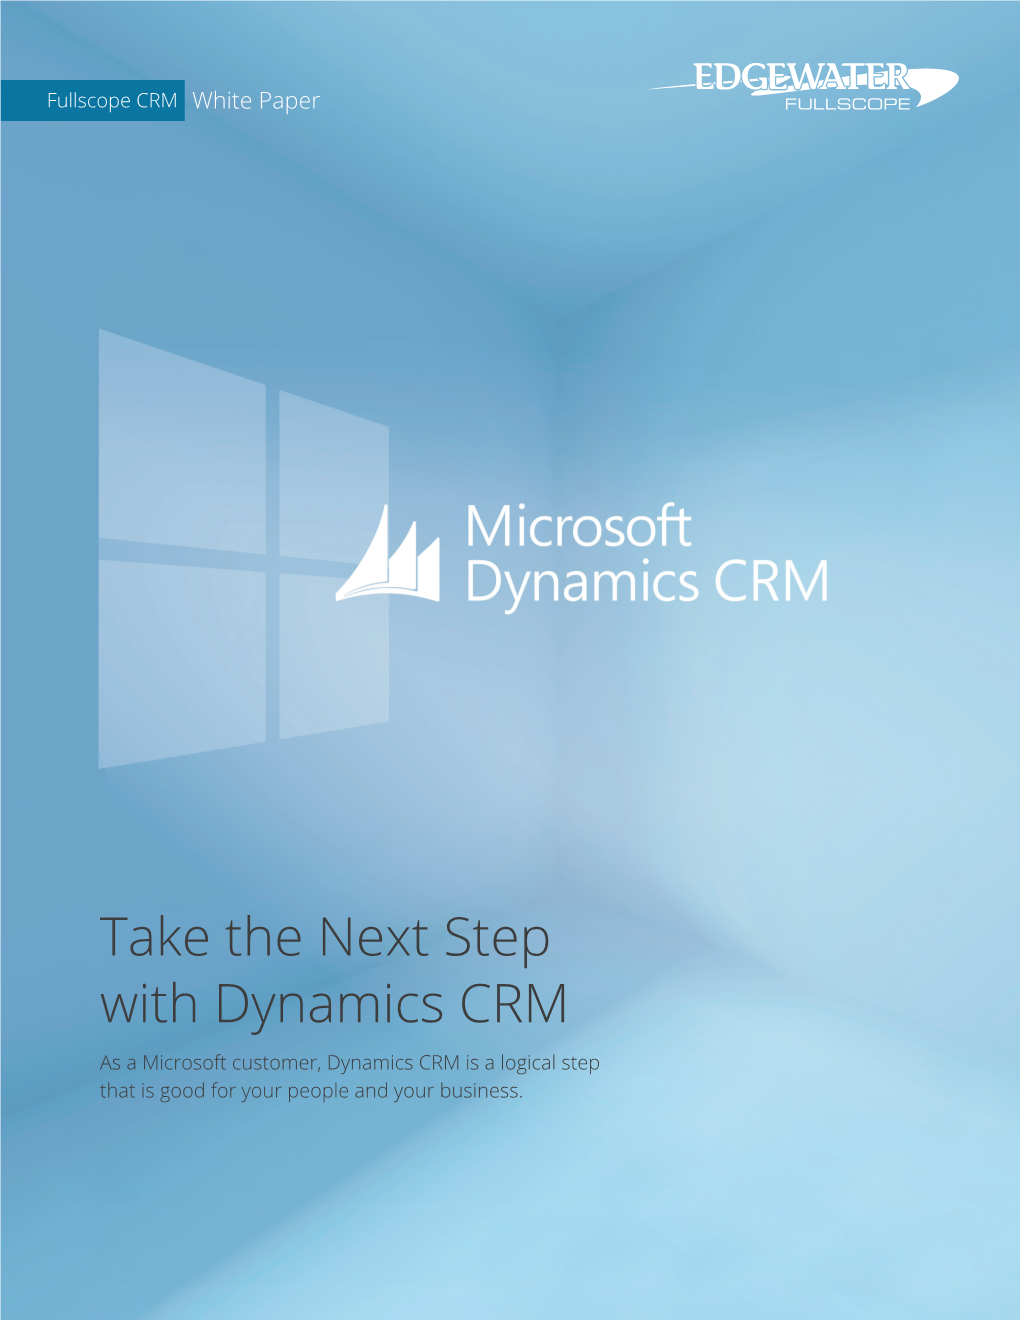 Take the Next Step with Dynamics CRM As a Microsoft Customer, Dynamics CRM Is a Logical Step That Is Good for Your People and Your Business